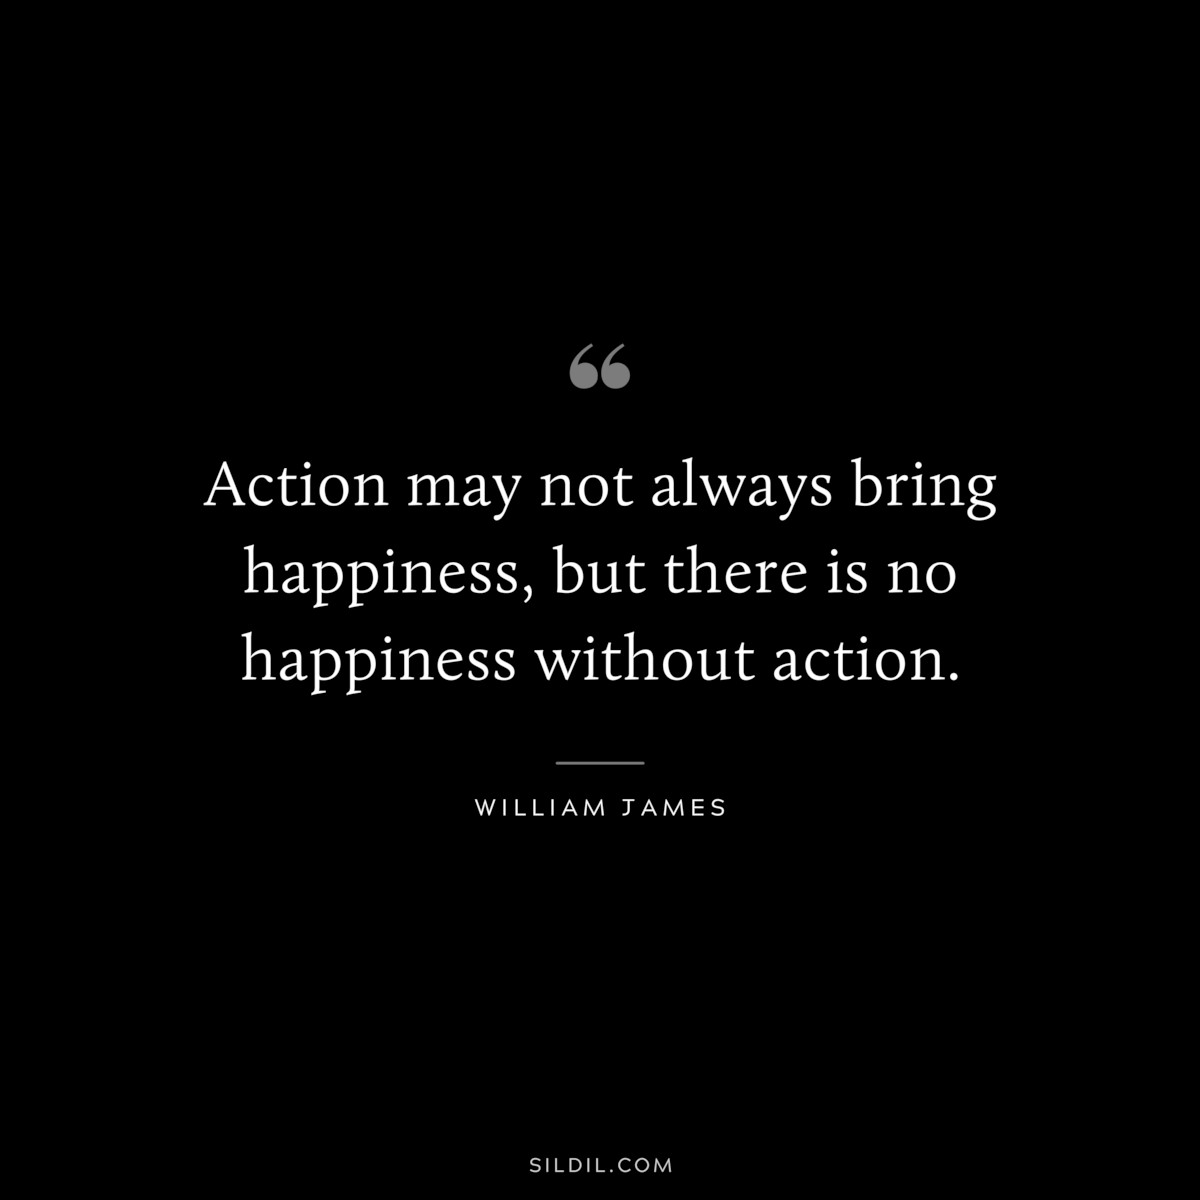 Action may not always bring happiness, but there is no happiness without action. ― William James